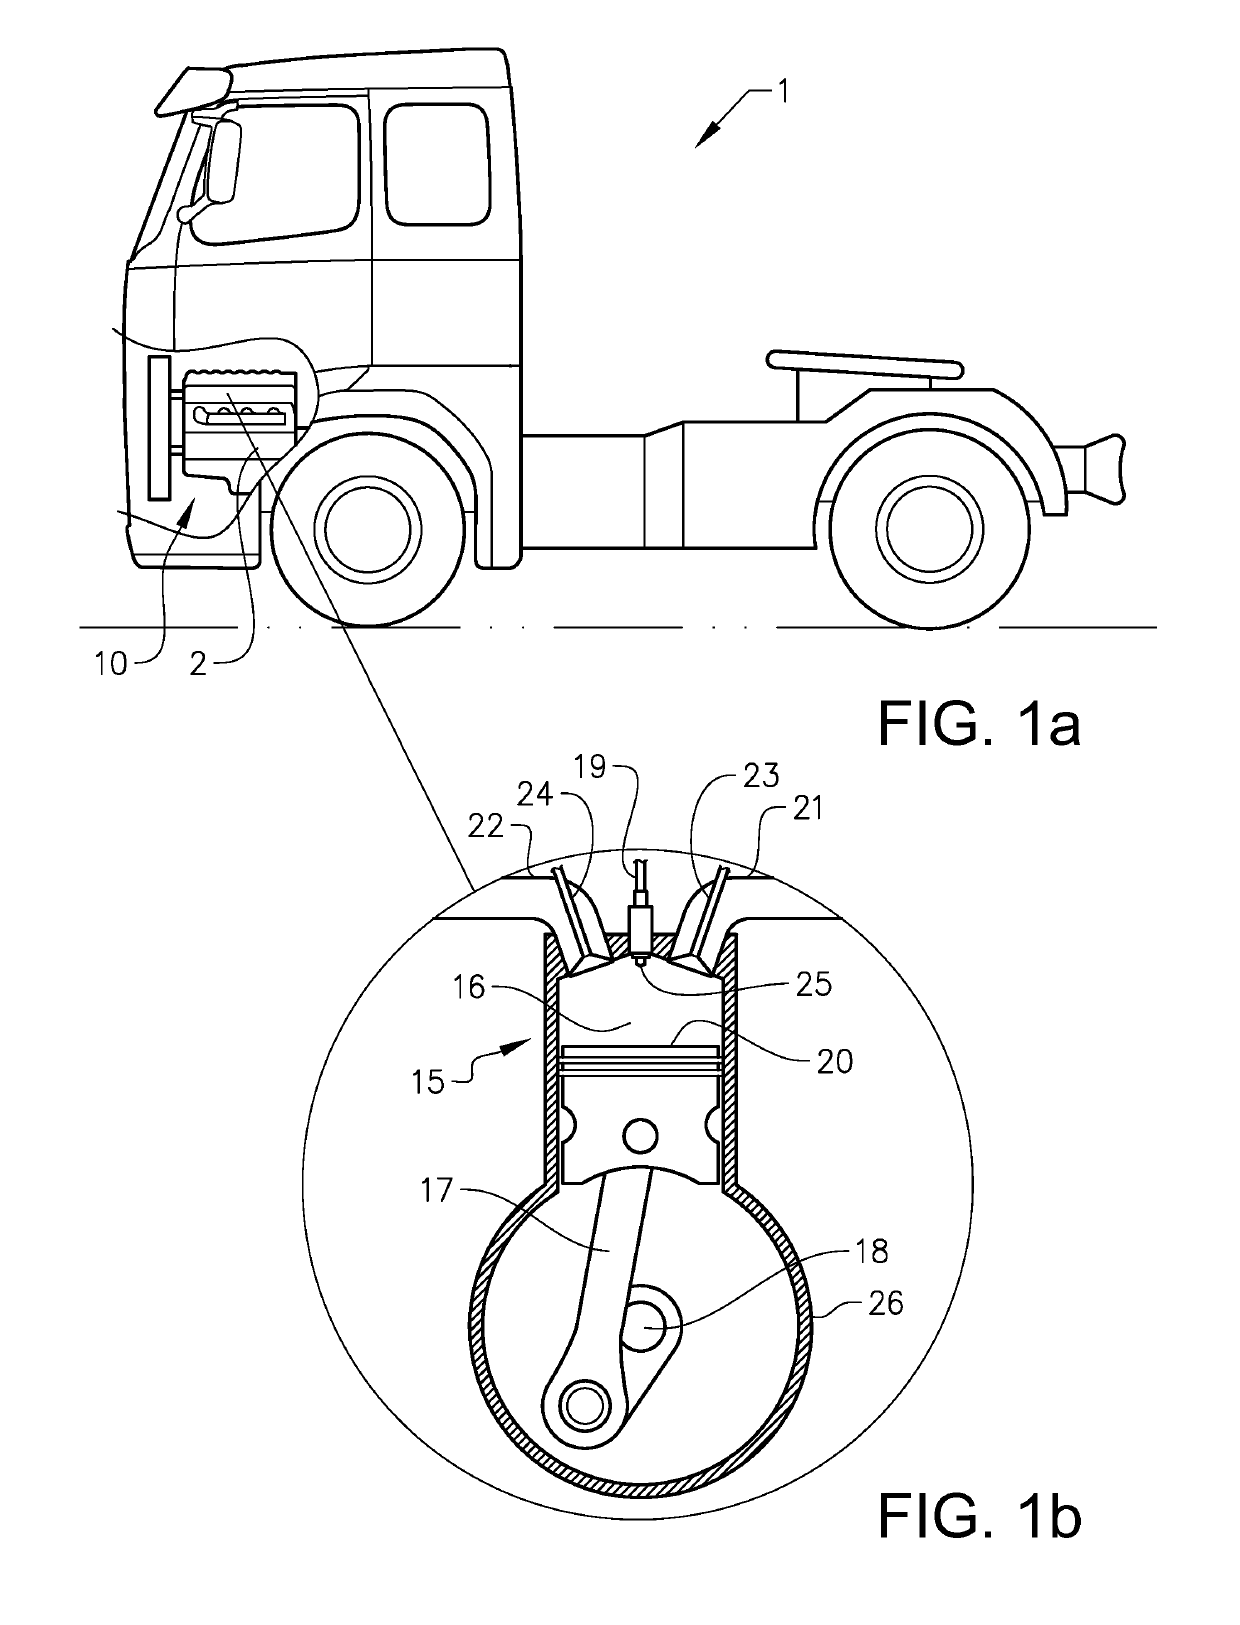 A piston for a cylinder for an internal combustion engine